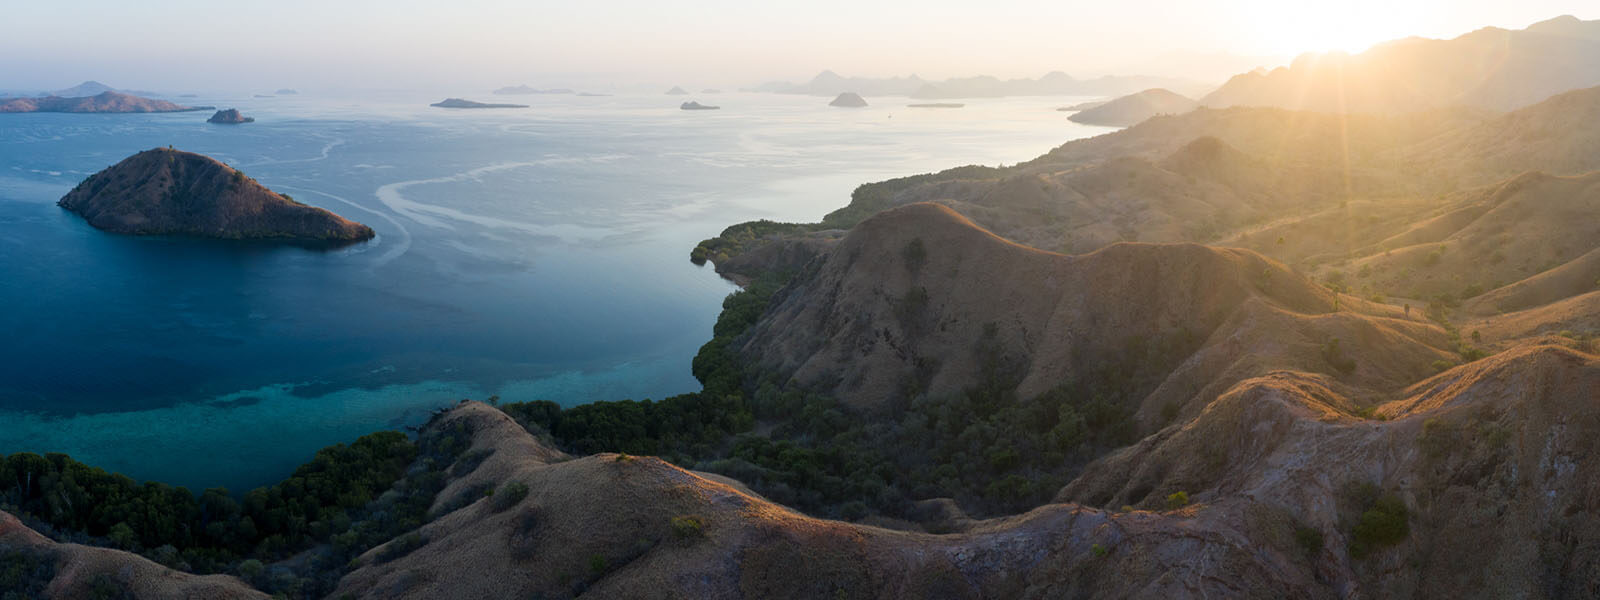 Sunset over Komodo national Park photographed while on a coral triangle adventures snorkeling tour